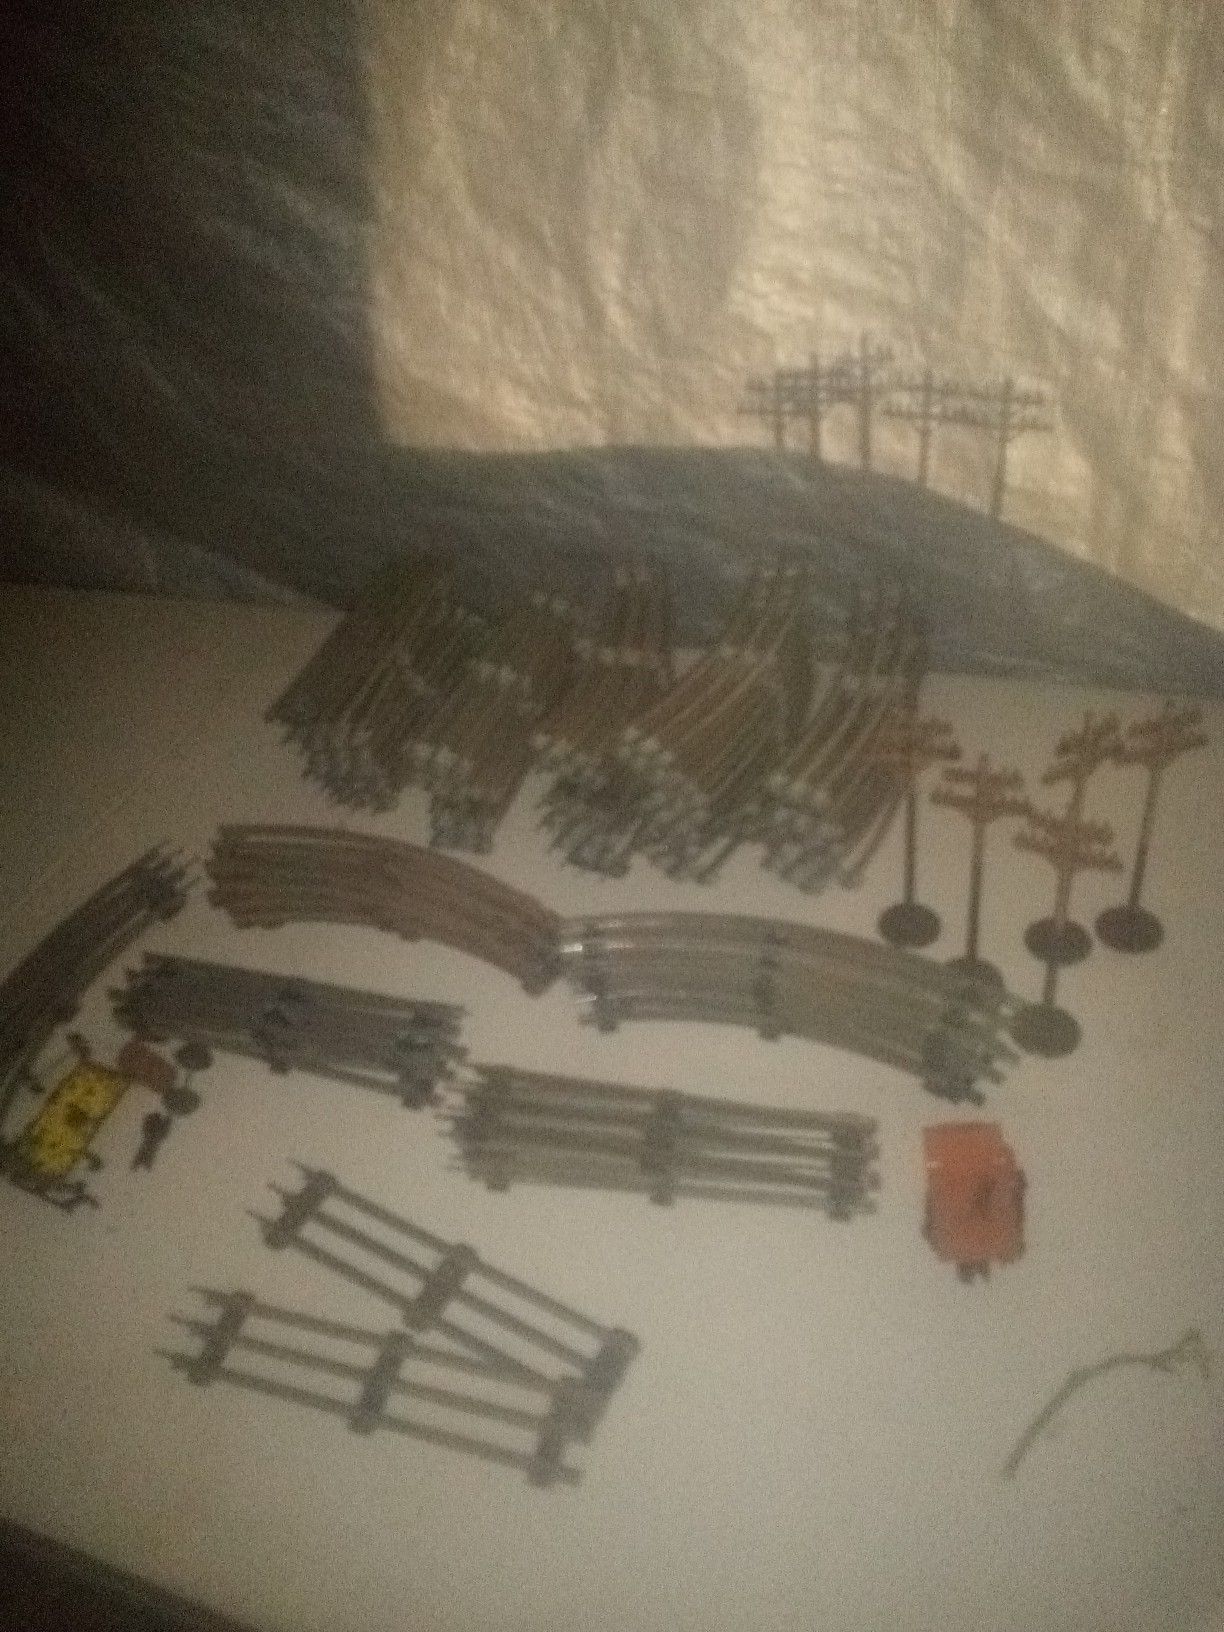 75+ pieces of all metal Lionel Train track